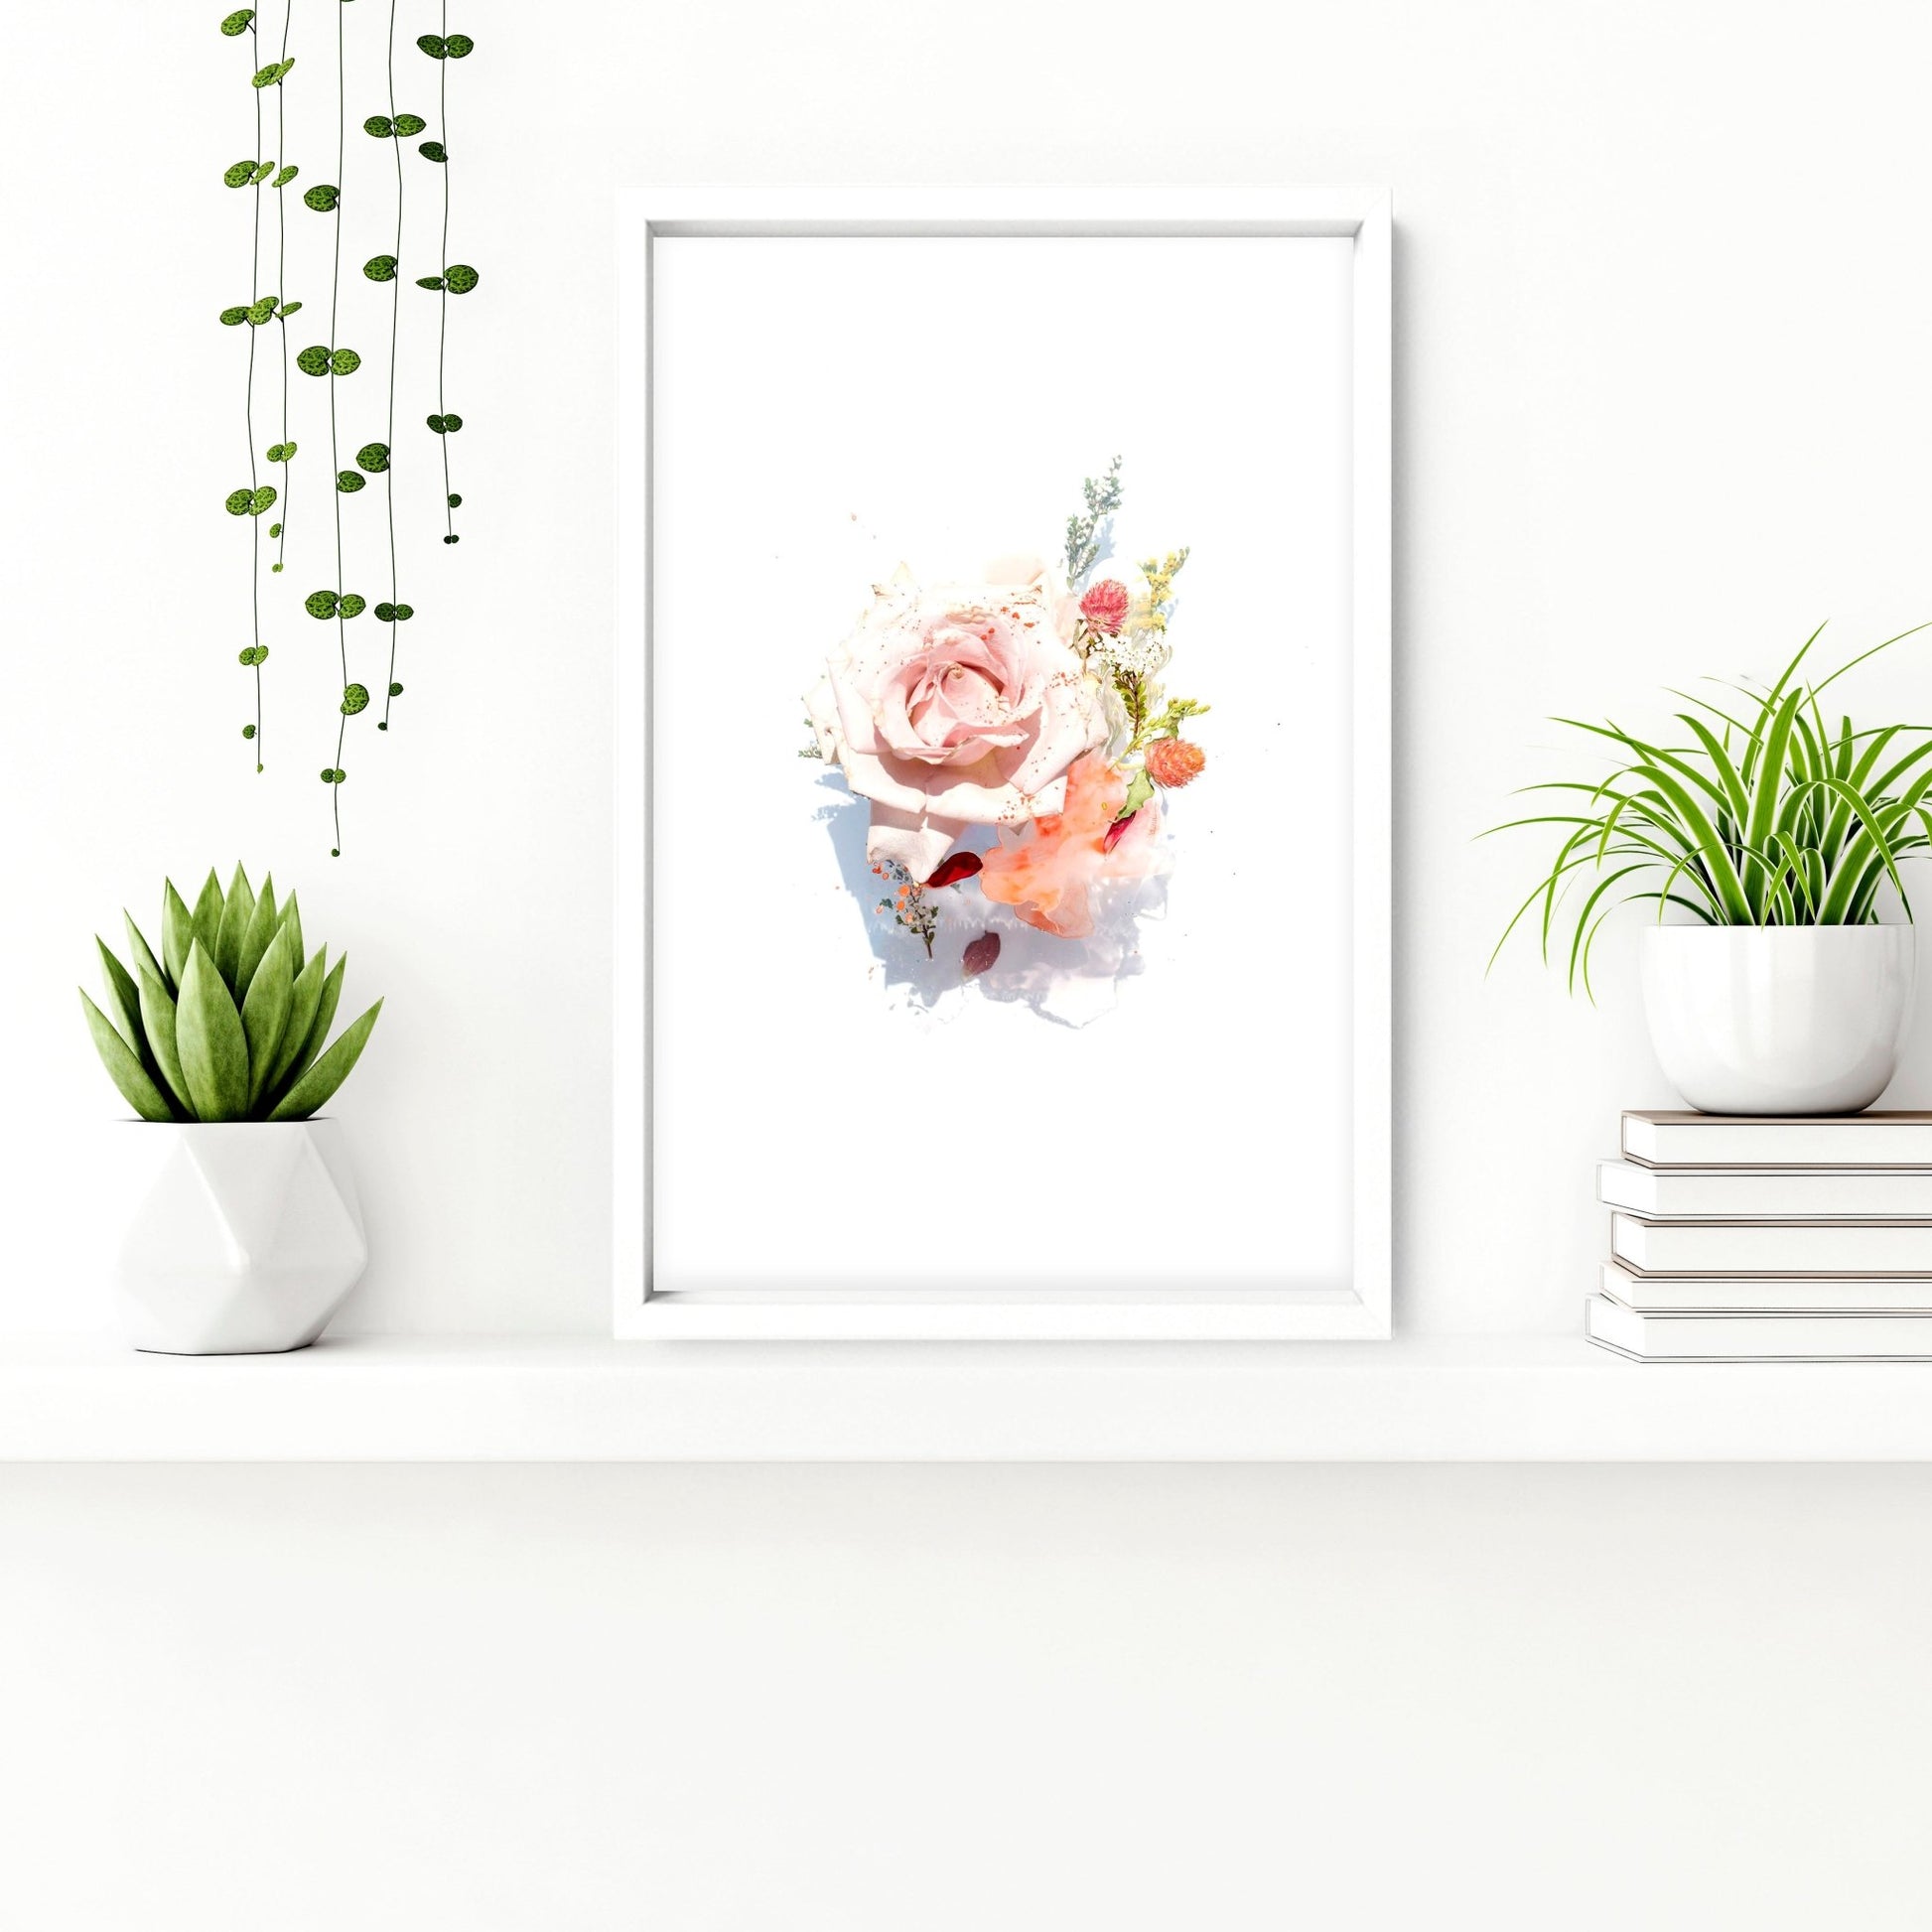 Framed pictures for bathroom | set of 3 wall art prints - About Wall Art